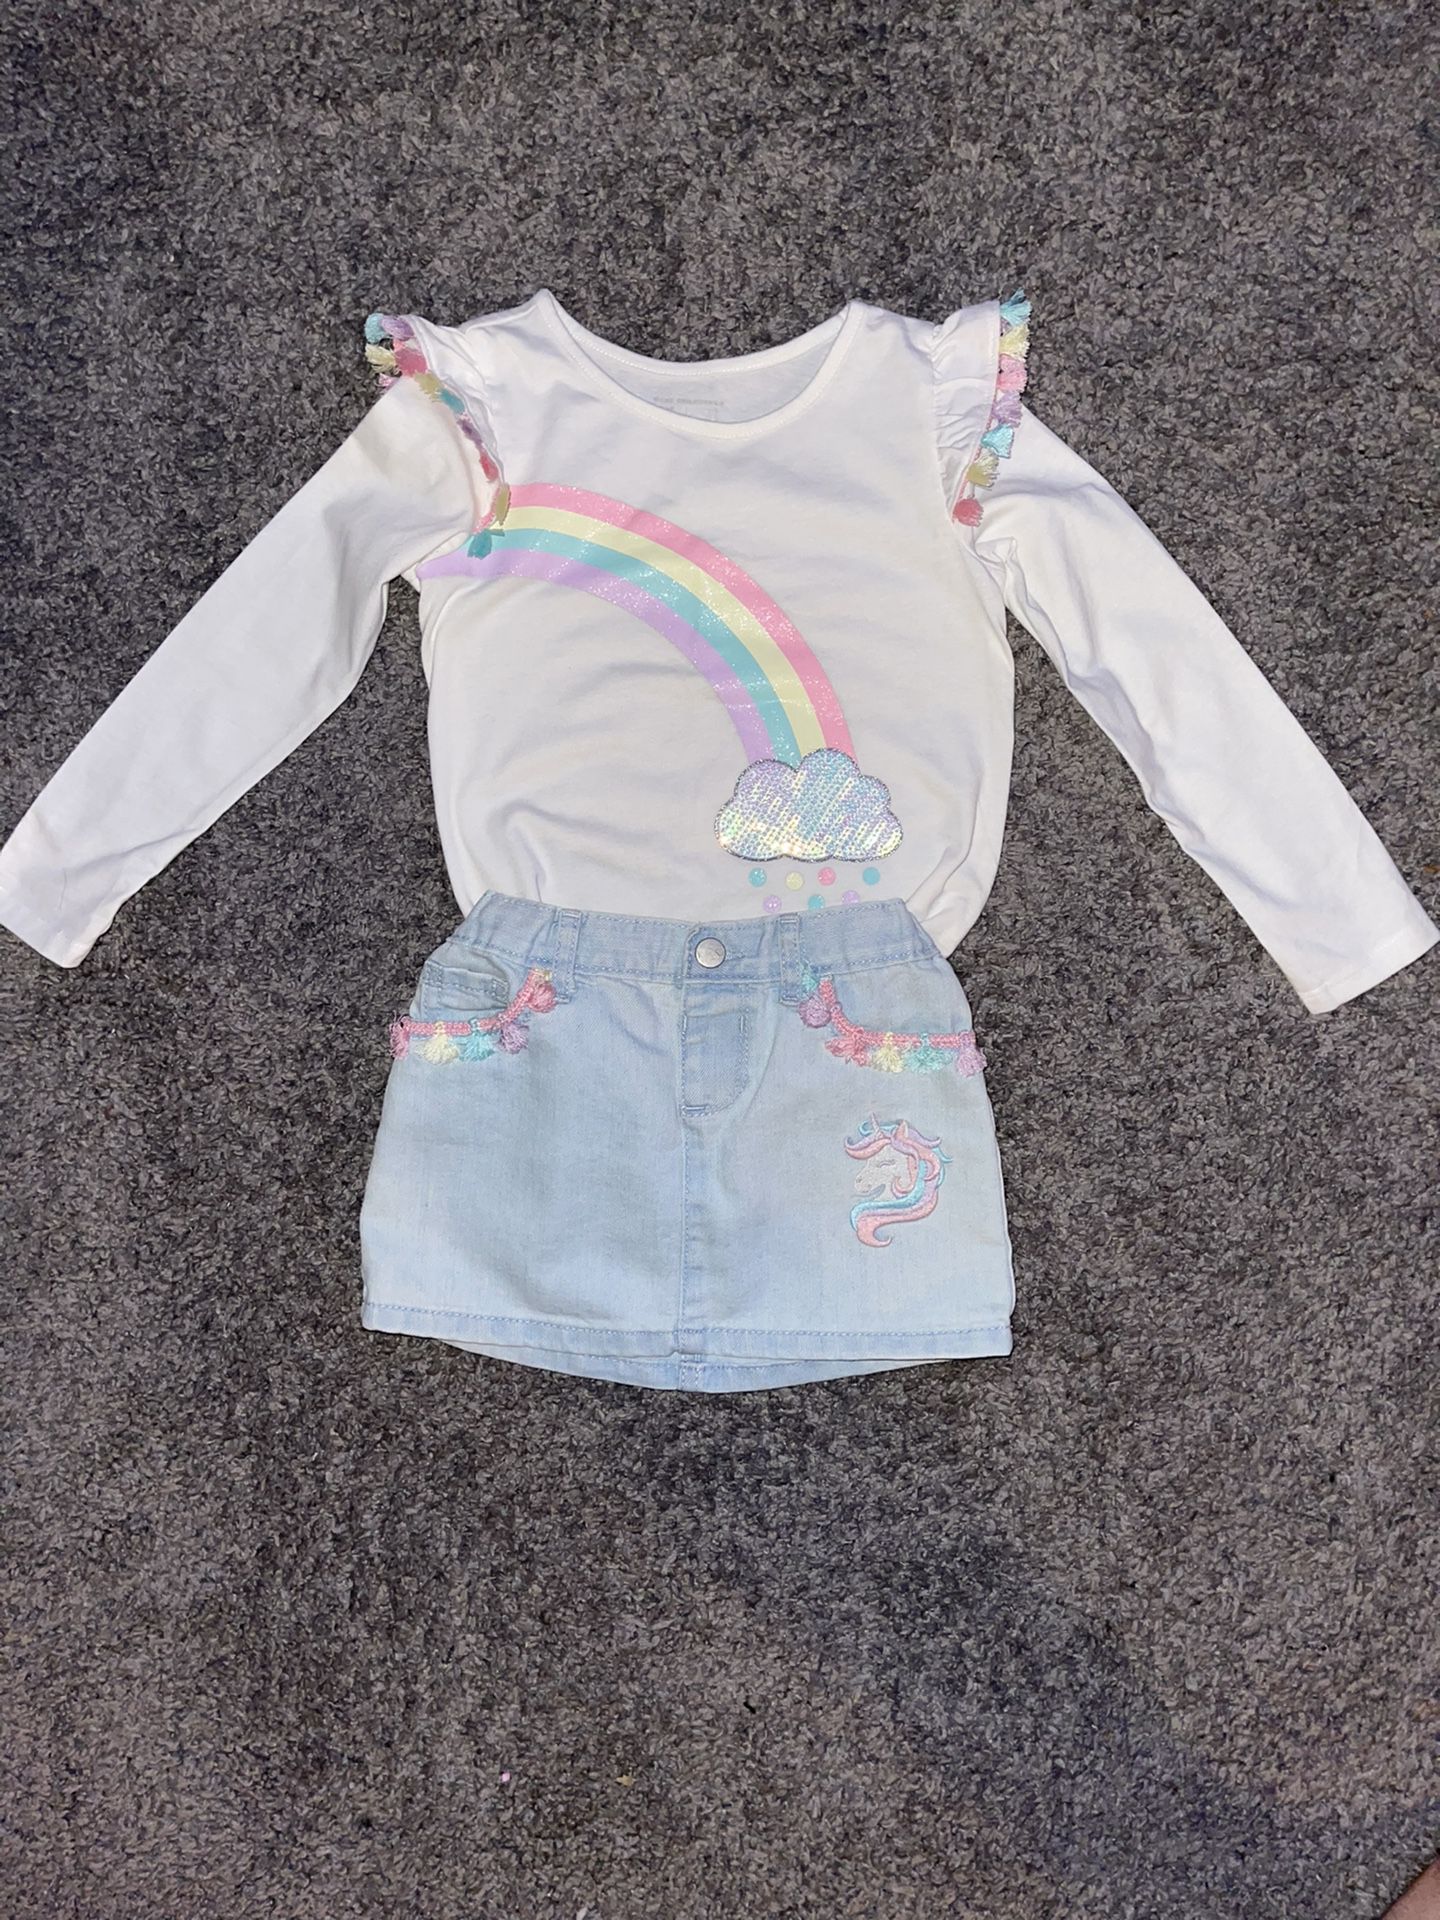 Toddler Girl Outfit 